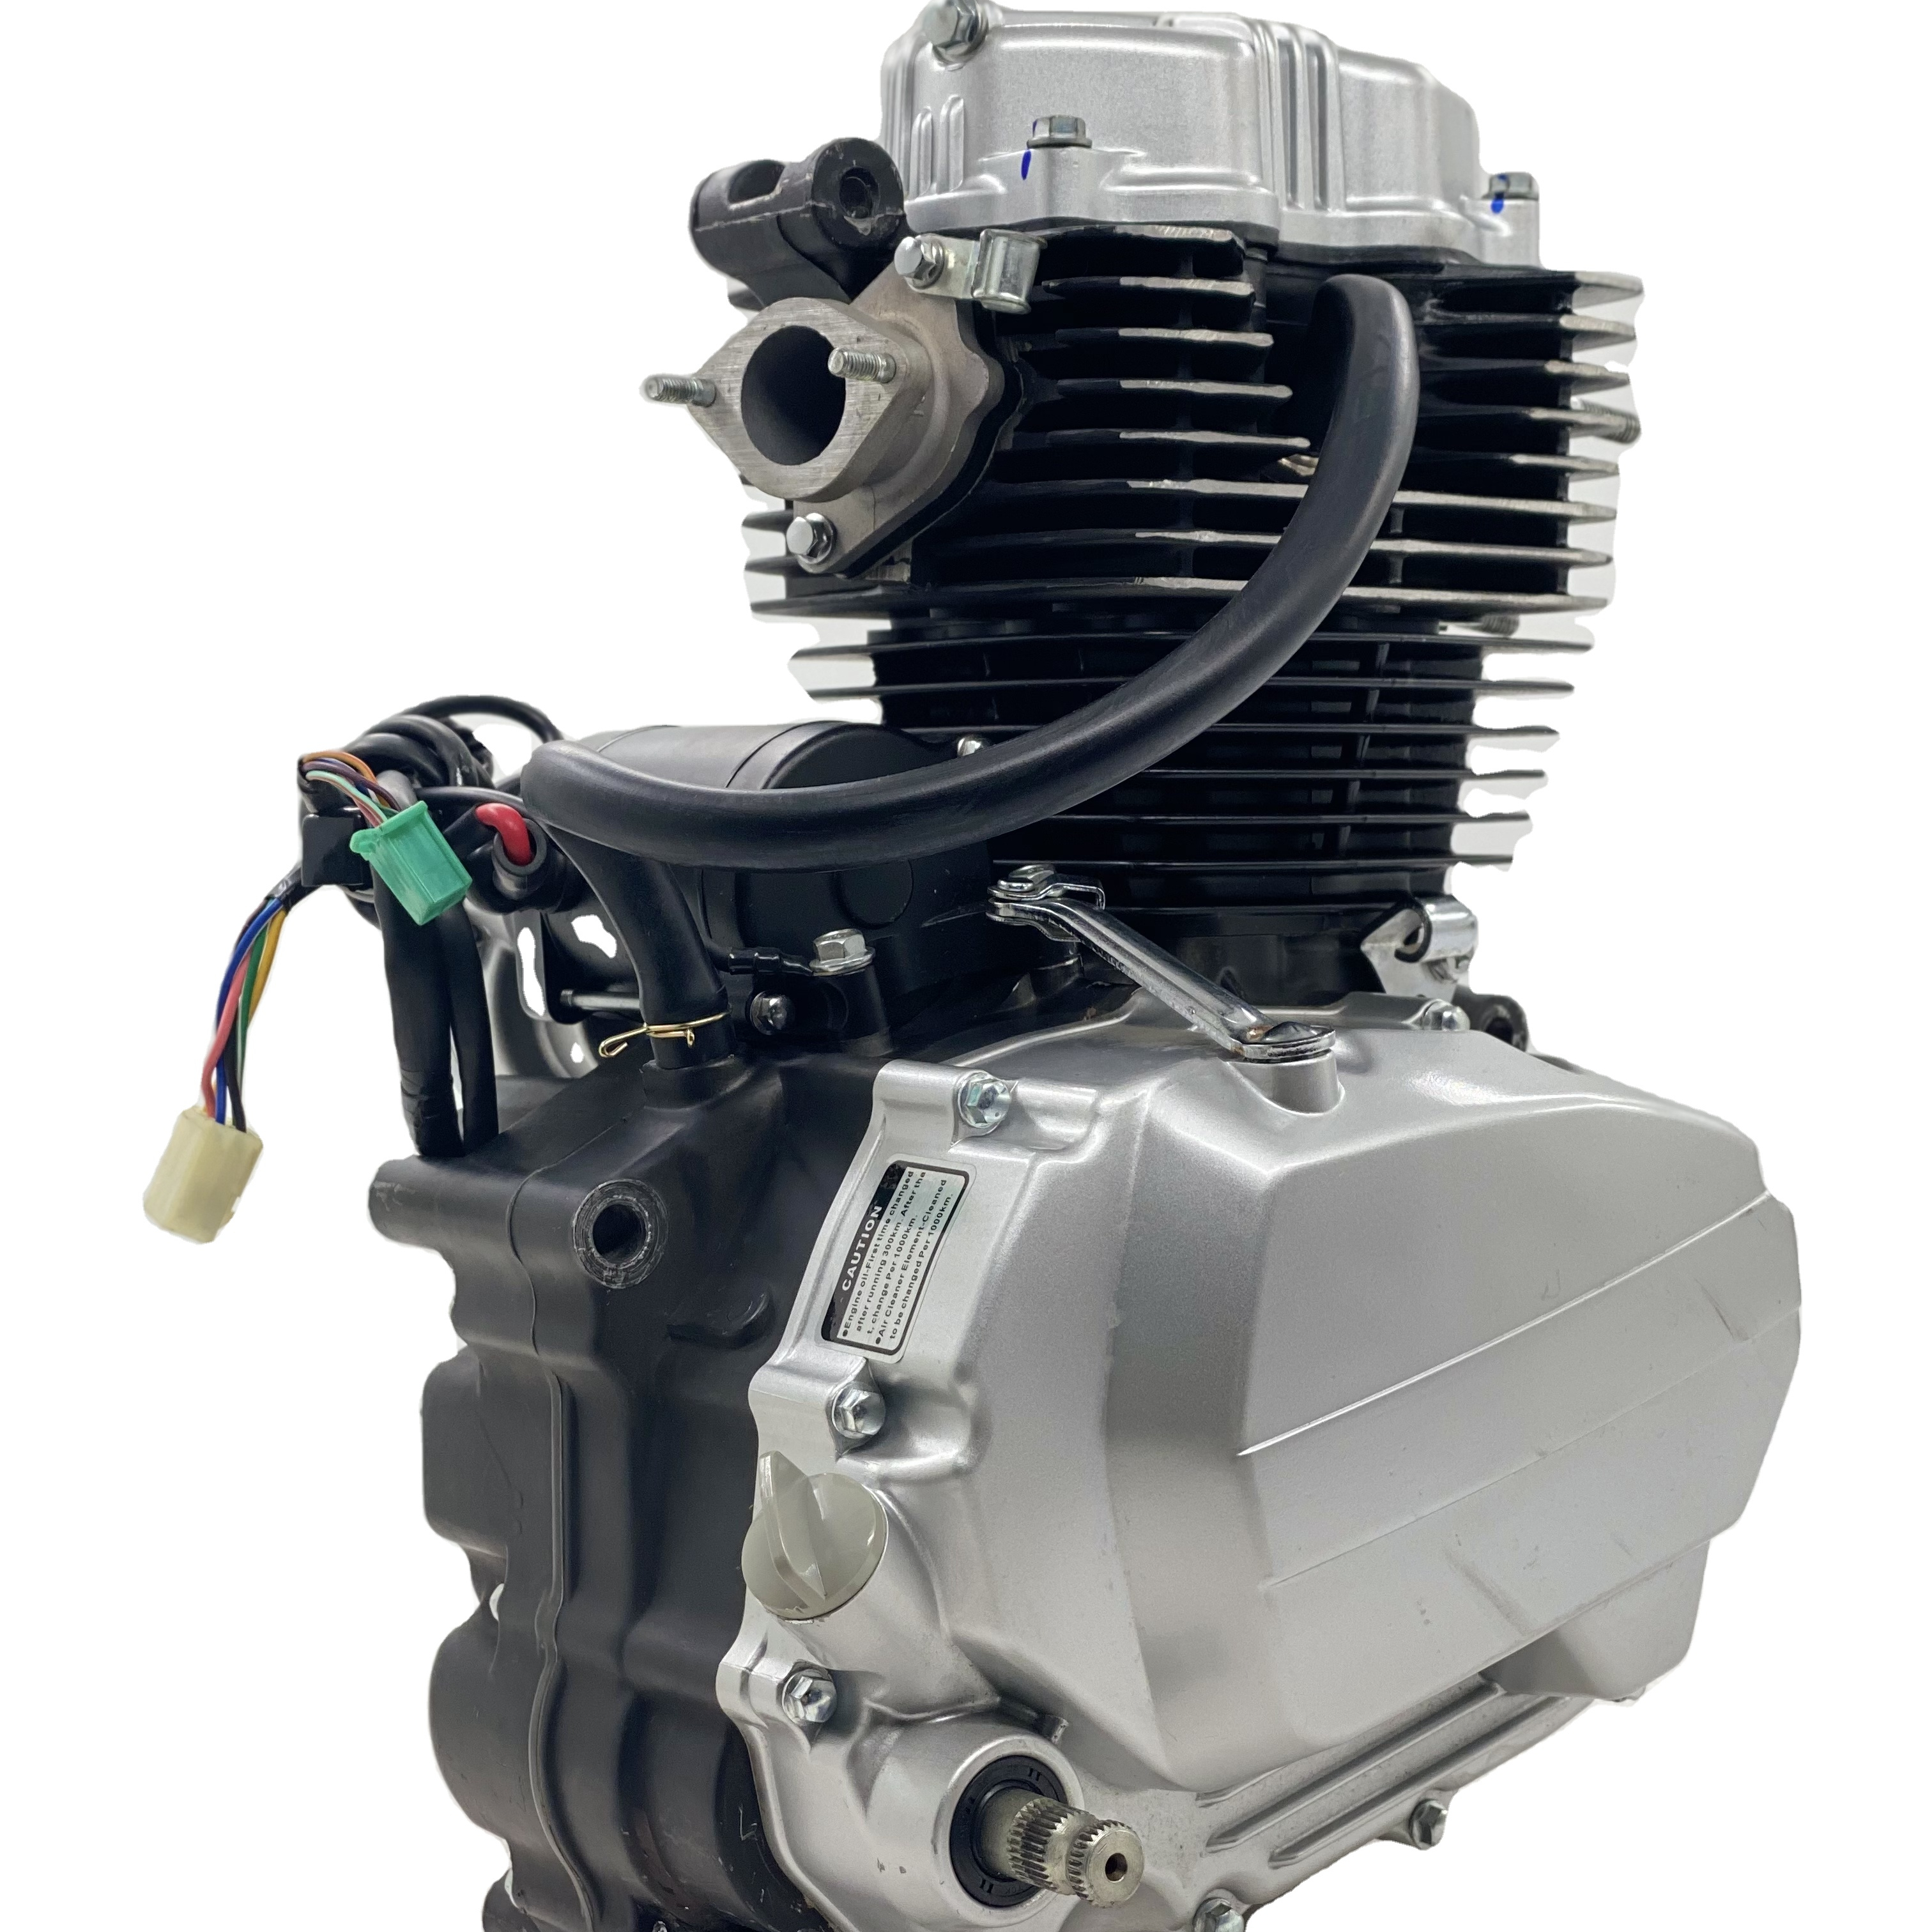 CG150 High Quality 1 Cylinder 4 Stroke Vertical Tricycle Engine 150cc Motorcycle Engine for tricycle engine assembly